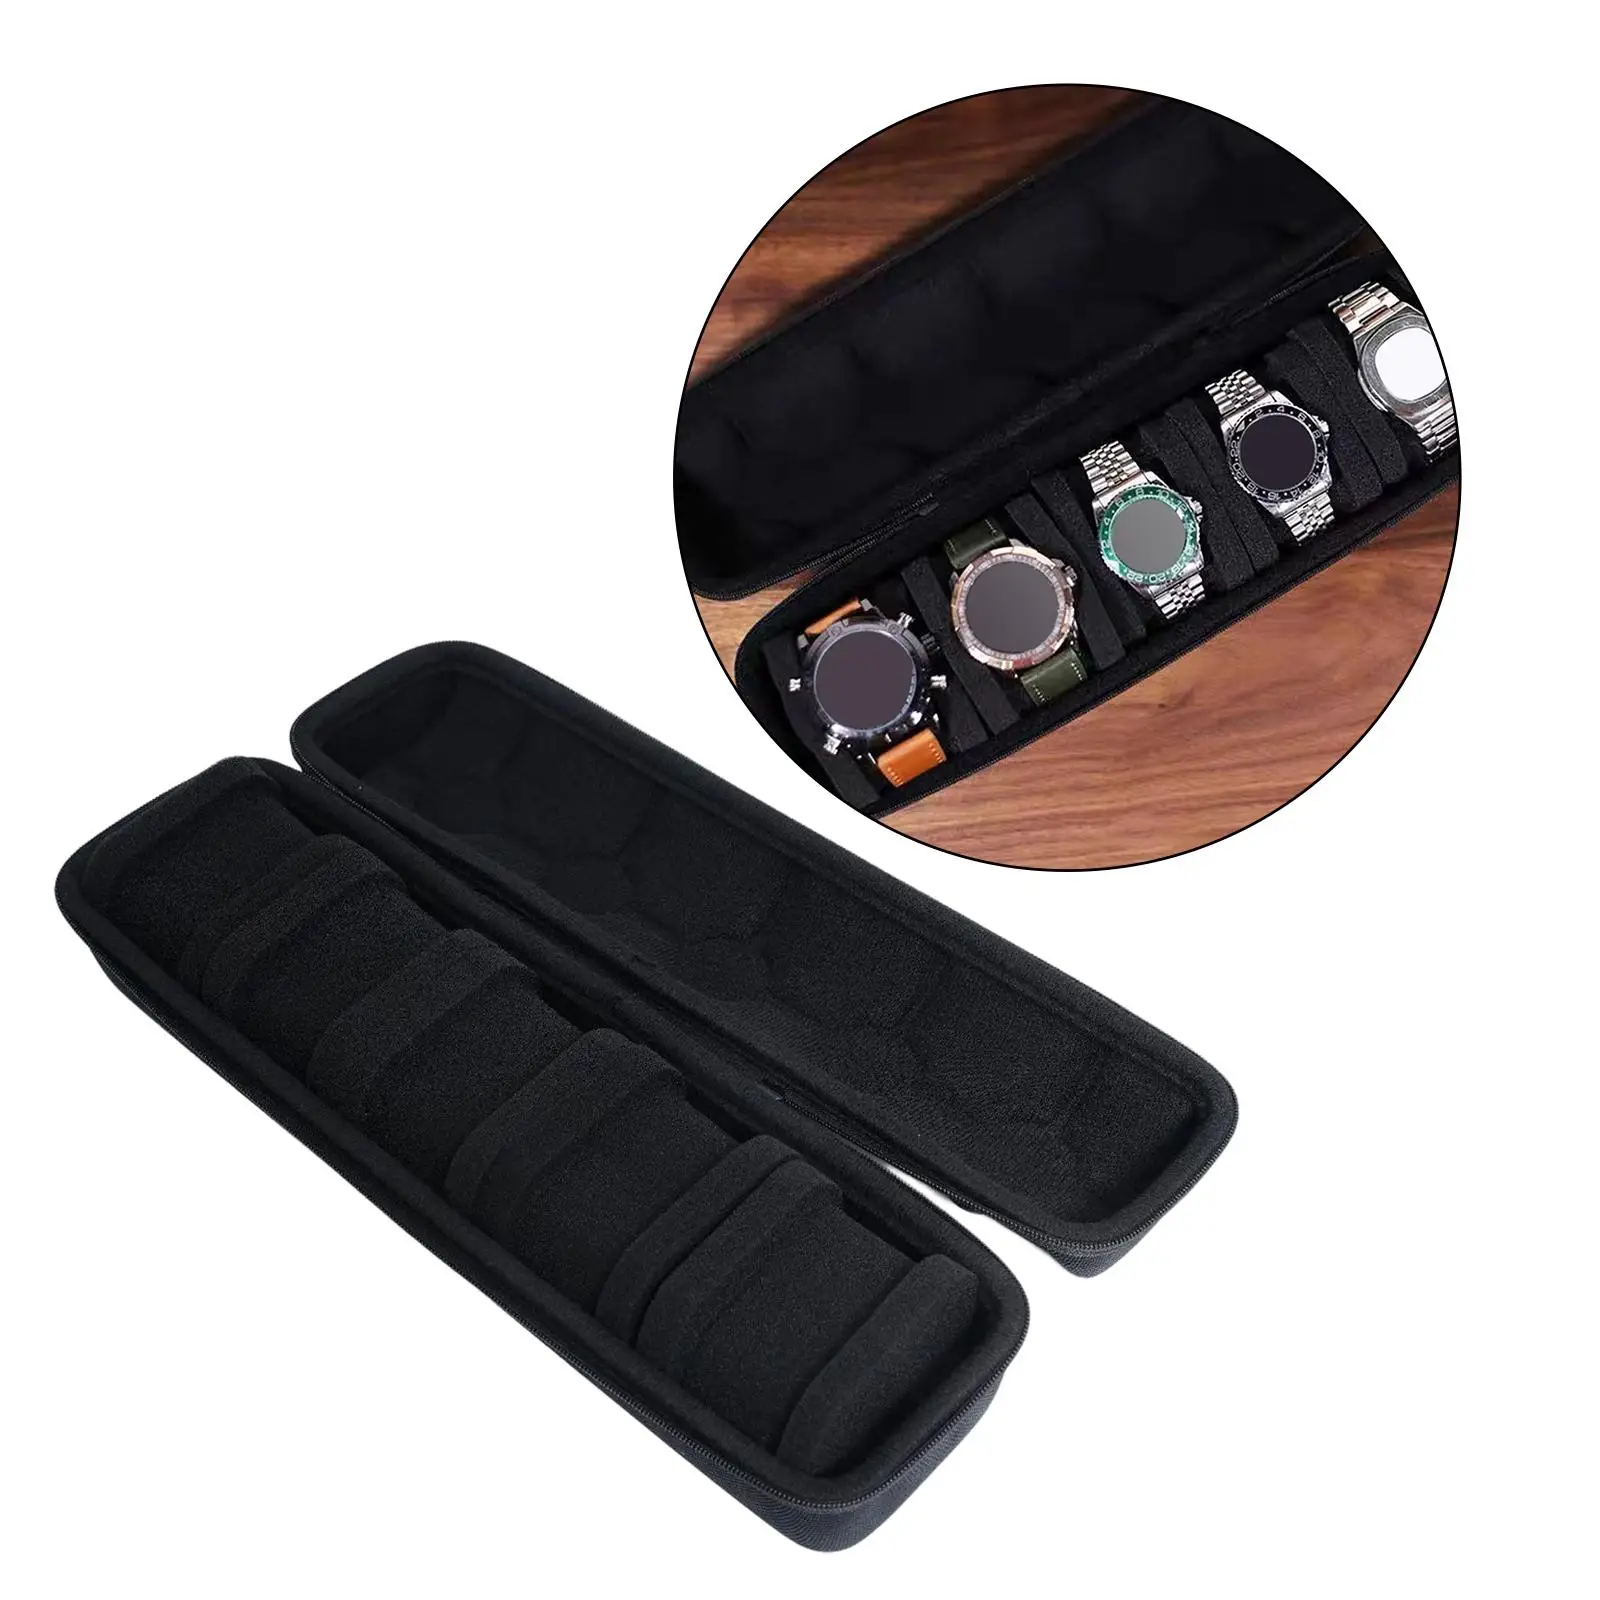 5 Slot Watch Roll Zipper Case Organizer with Anti Moving Pillow Storing Earrings, Bracelets and Other Jewelry Multifunctional